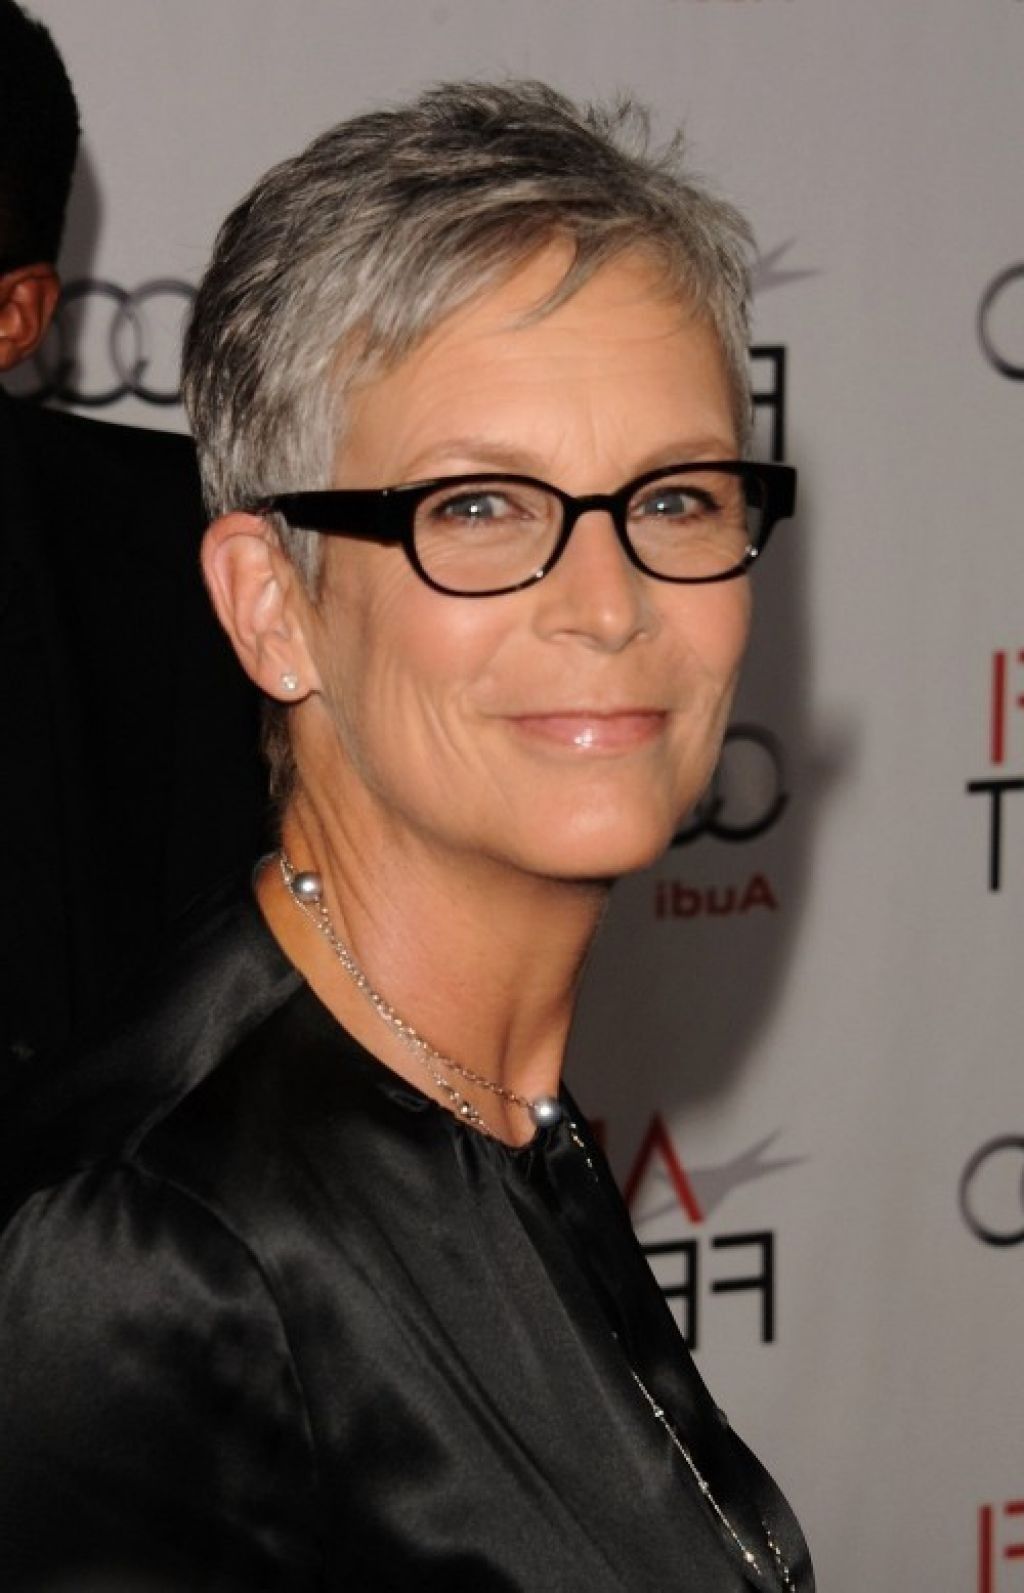 Short gray haircut 50 years old hairstyle with glasses